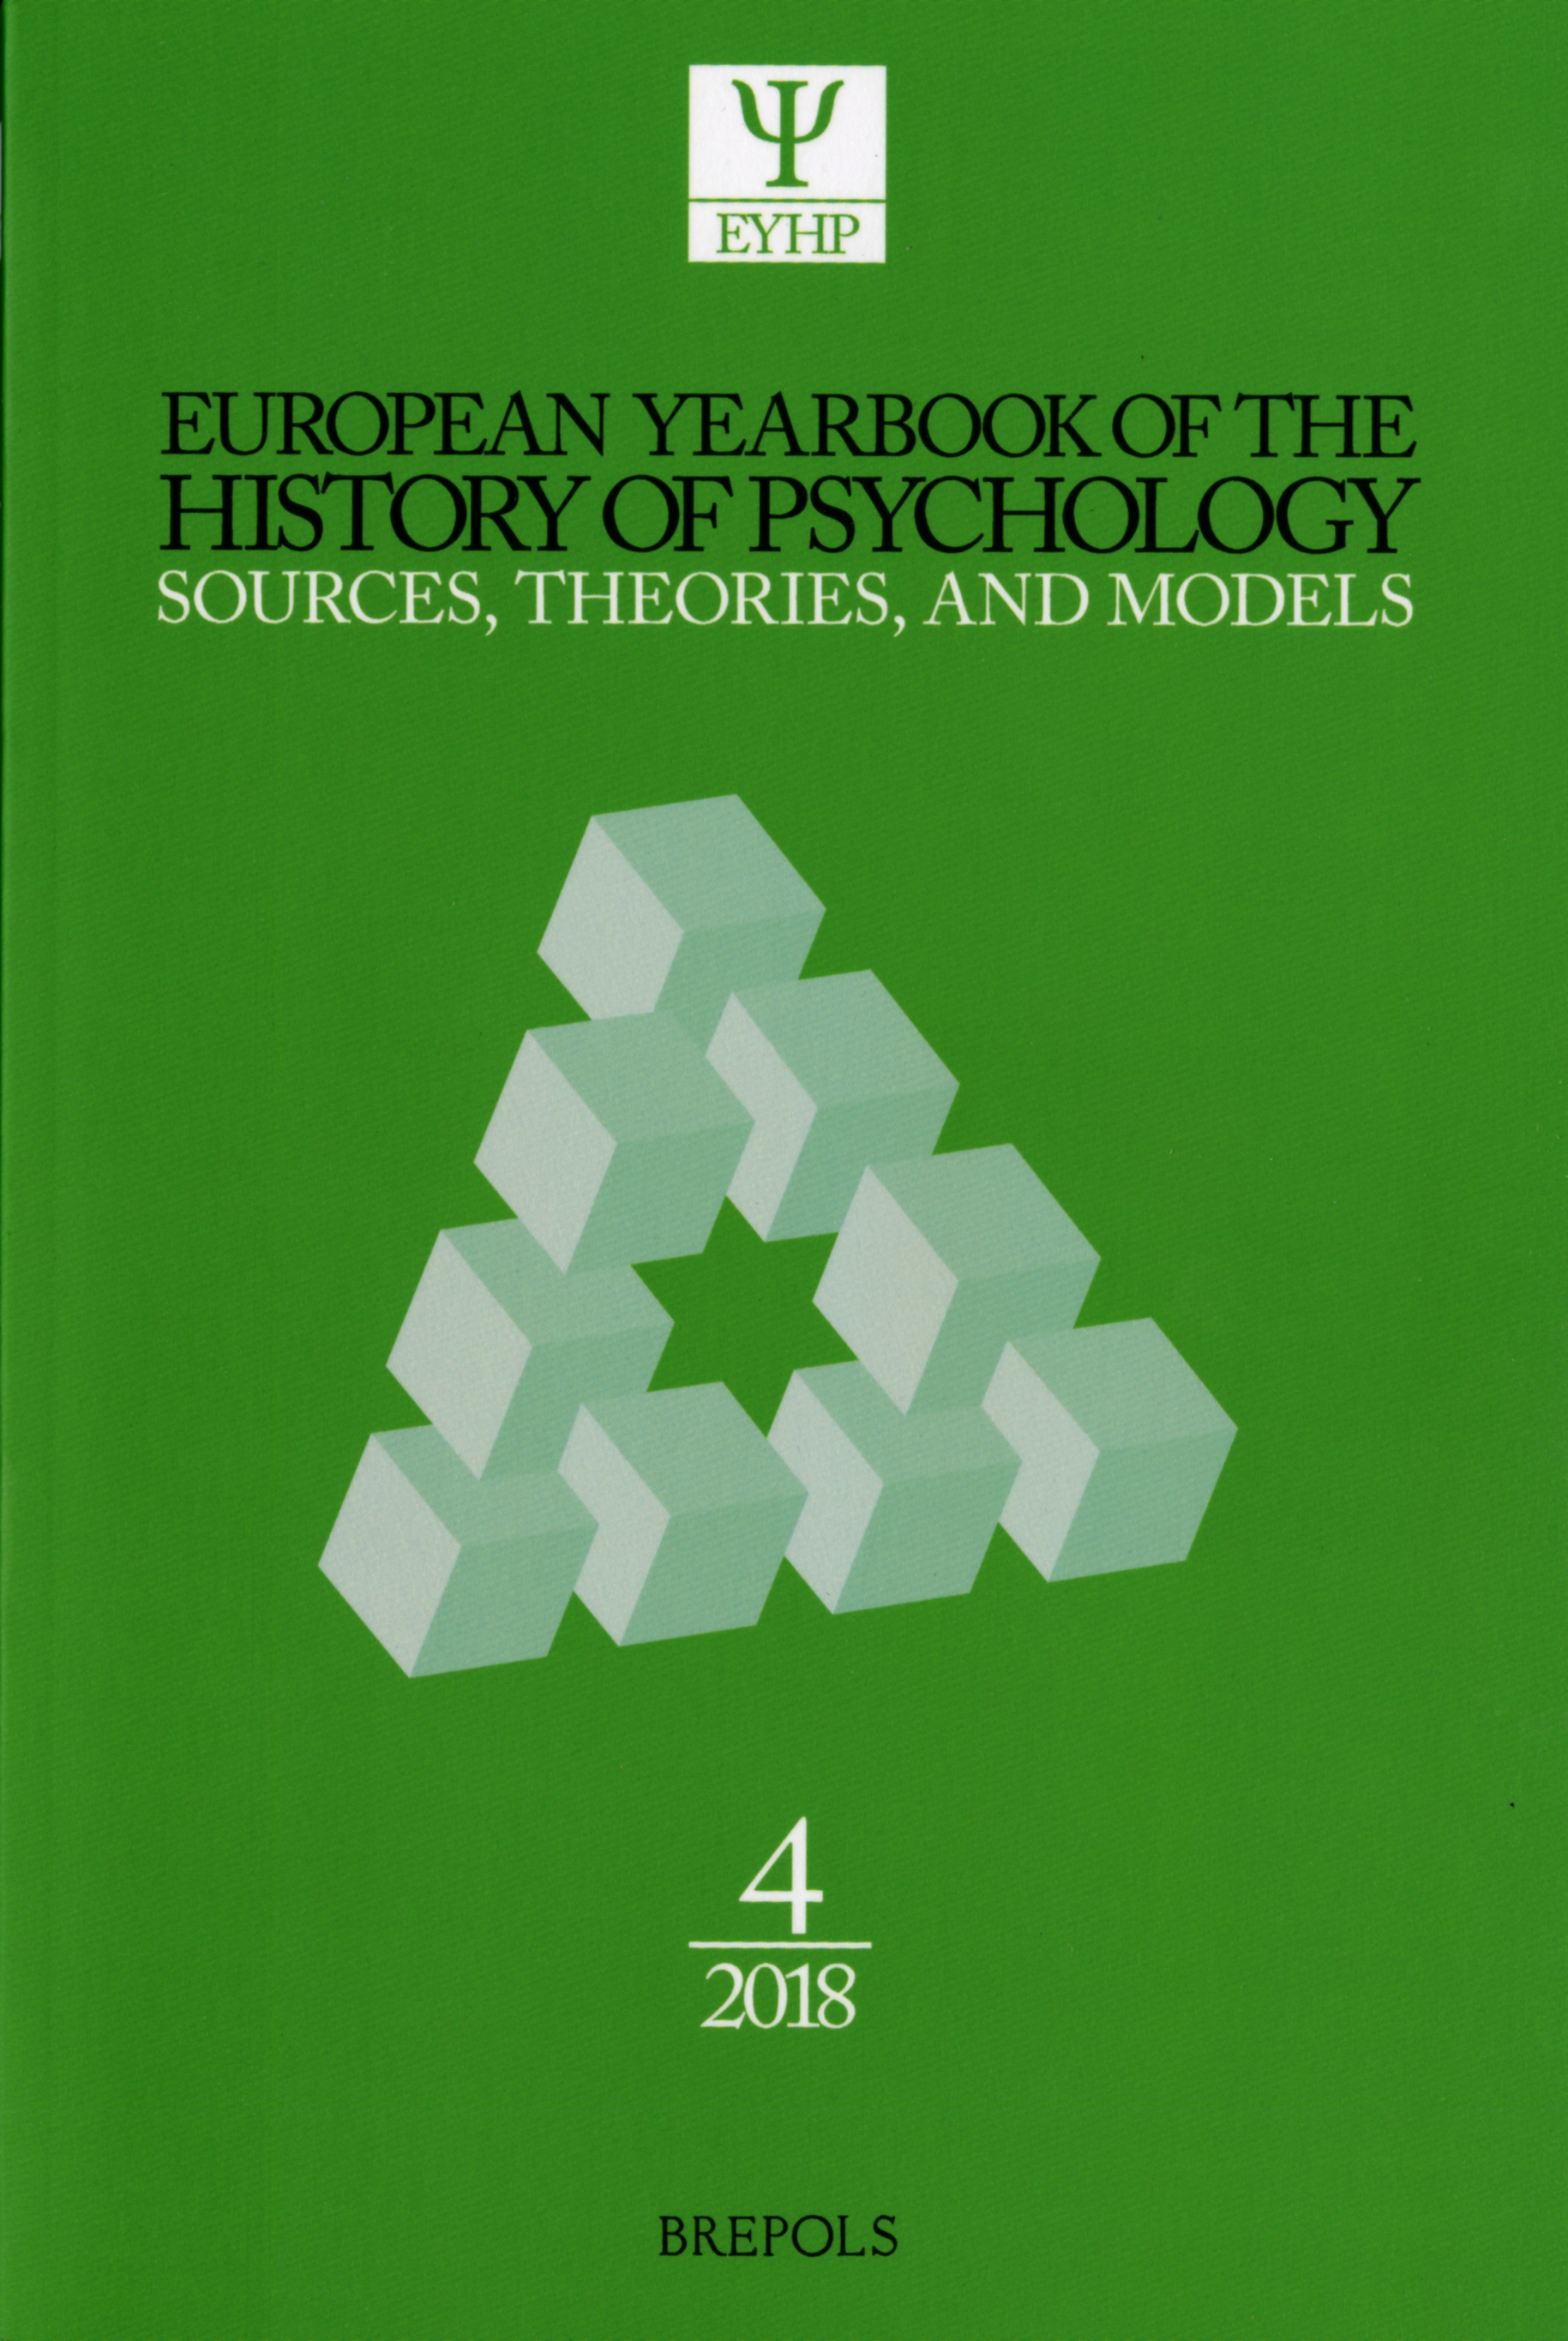 European Yearbook of the History of Psychology (2018)